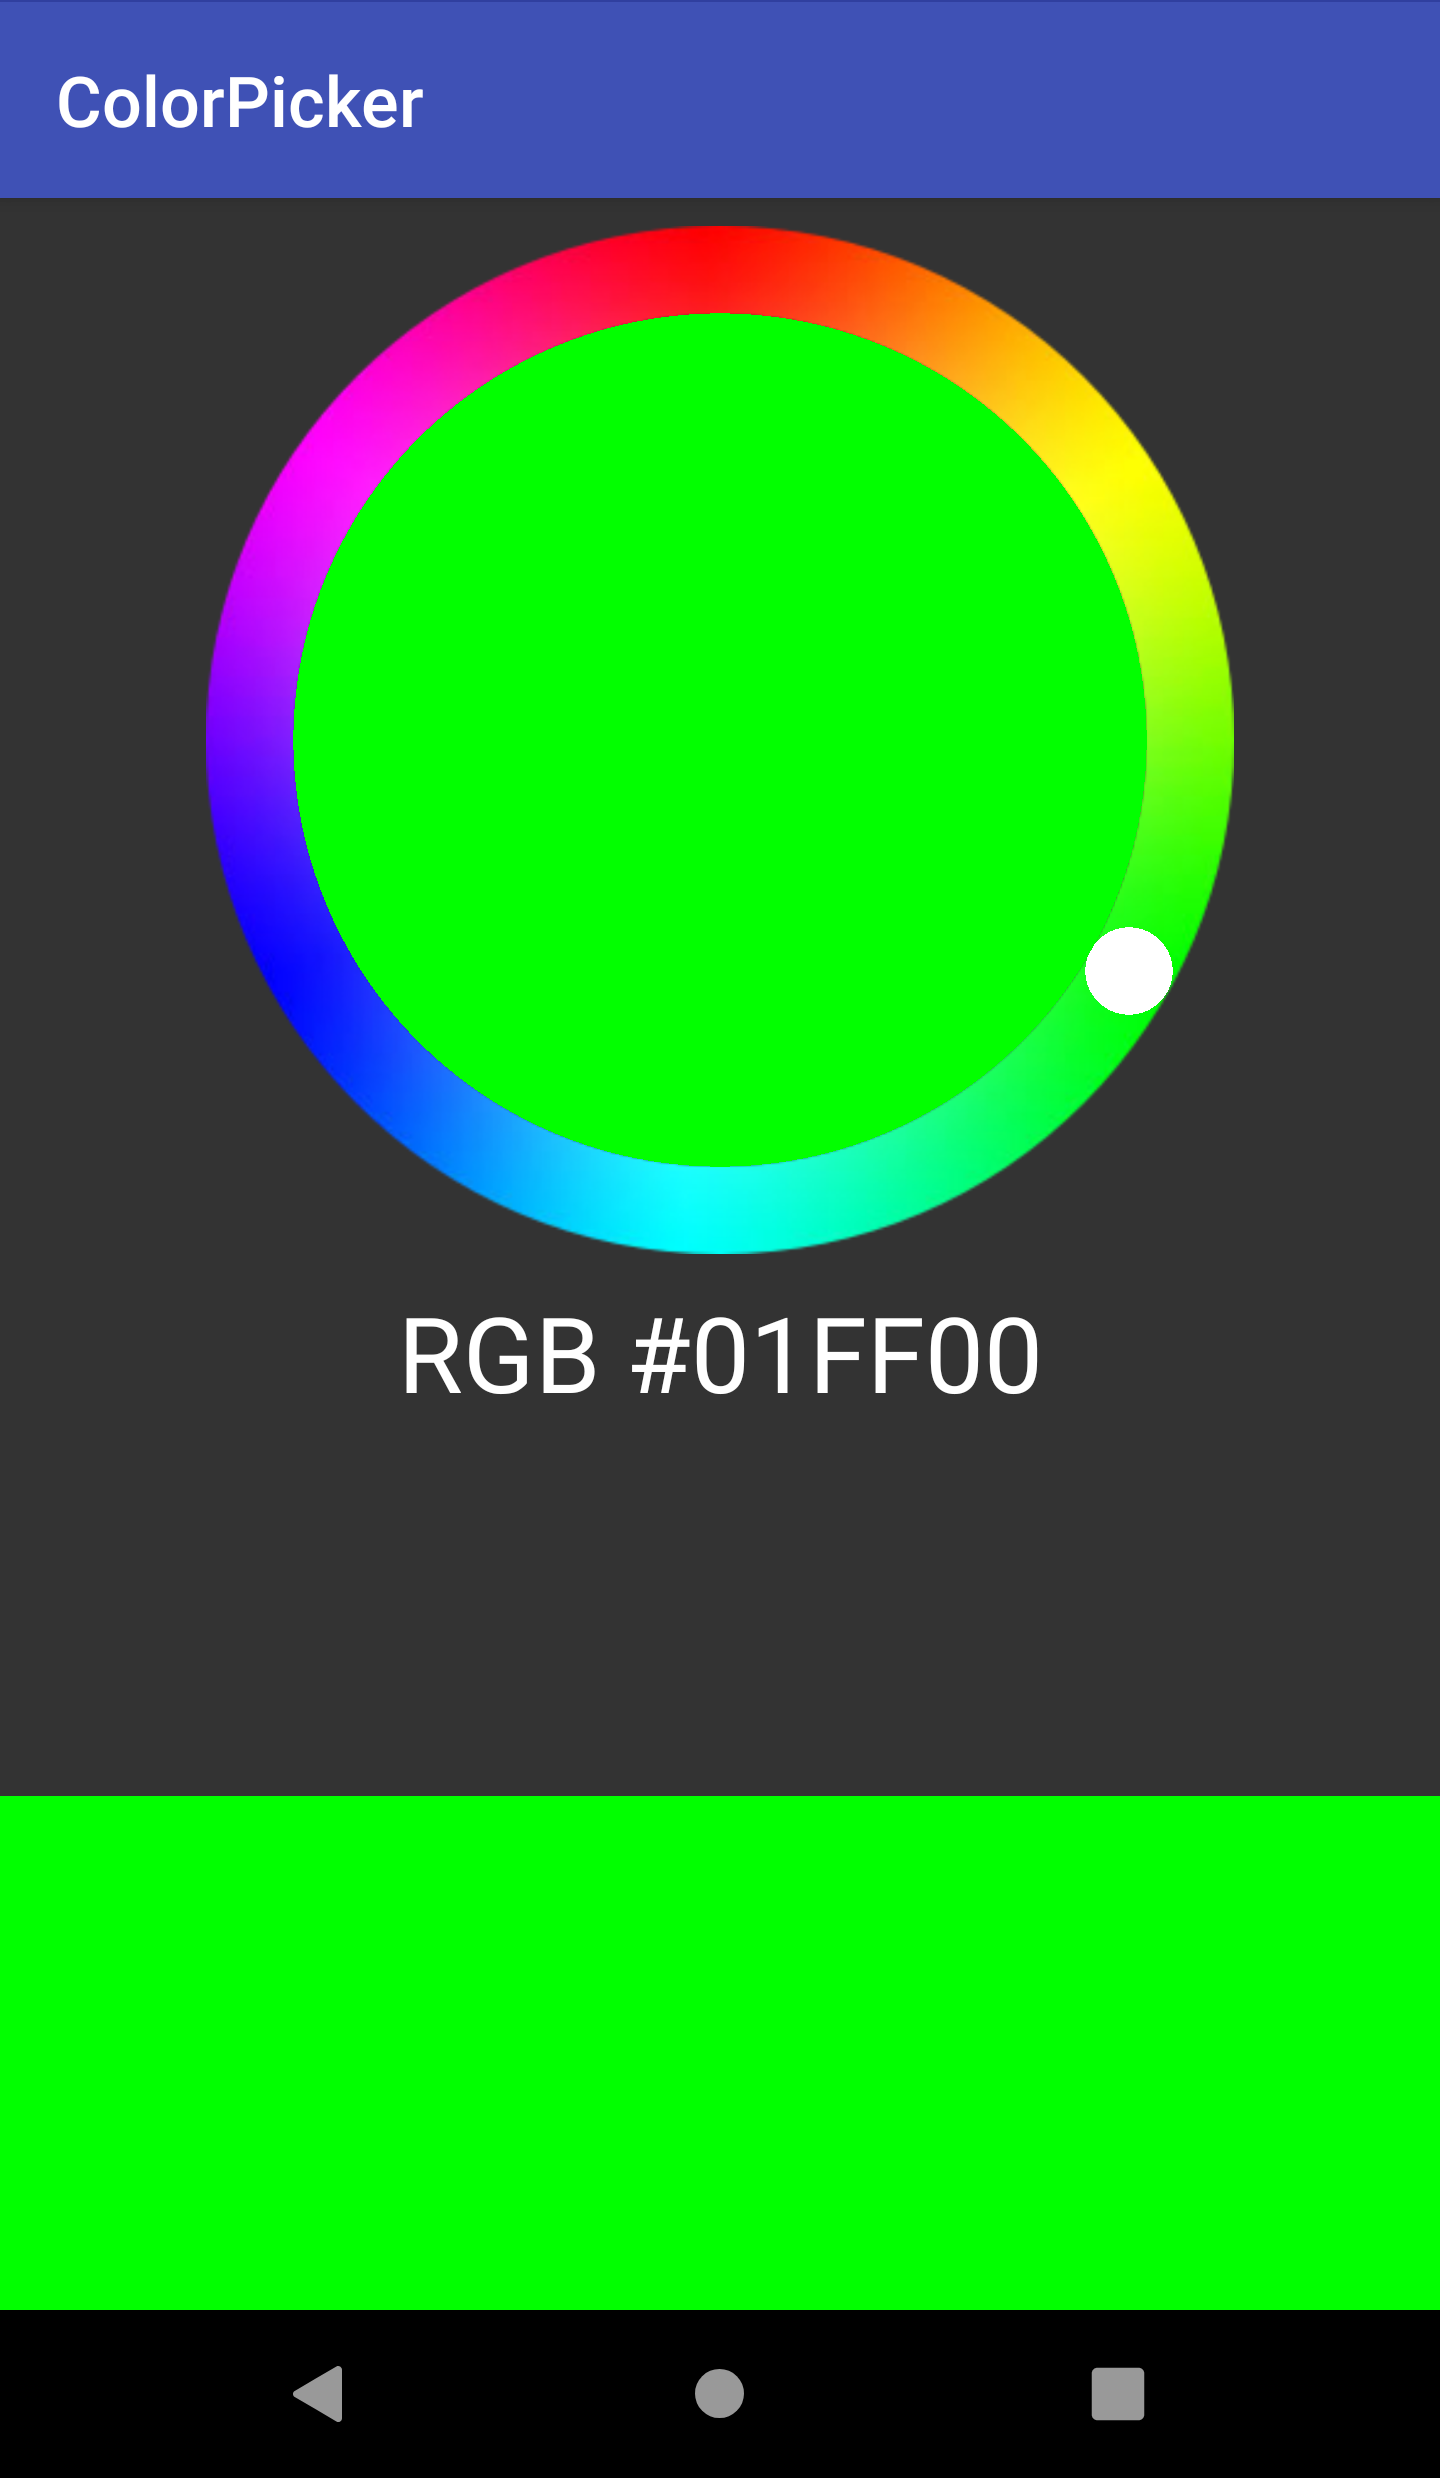 Screenshot of color picker, after moving to a new color